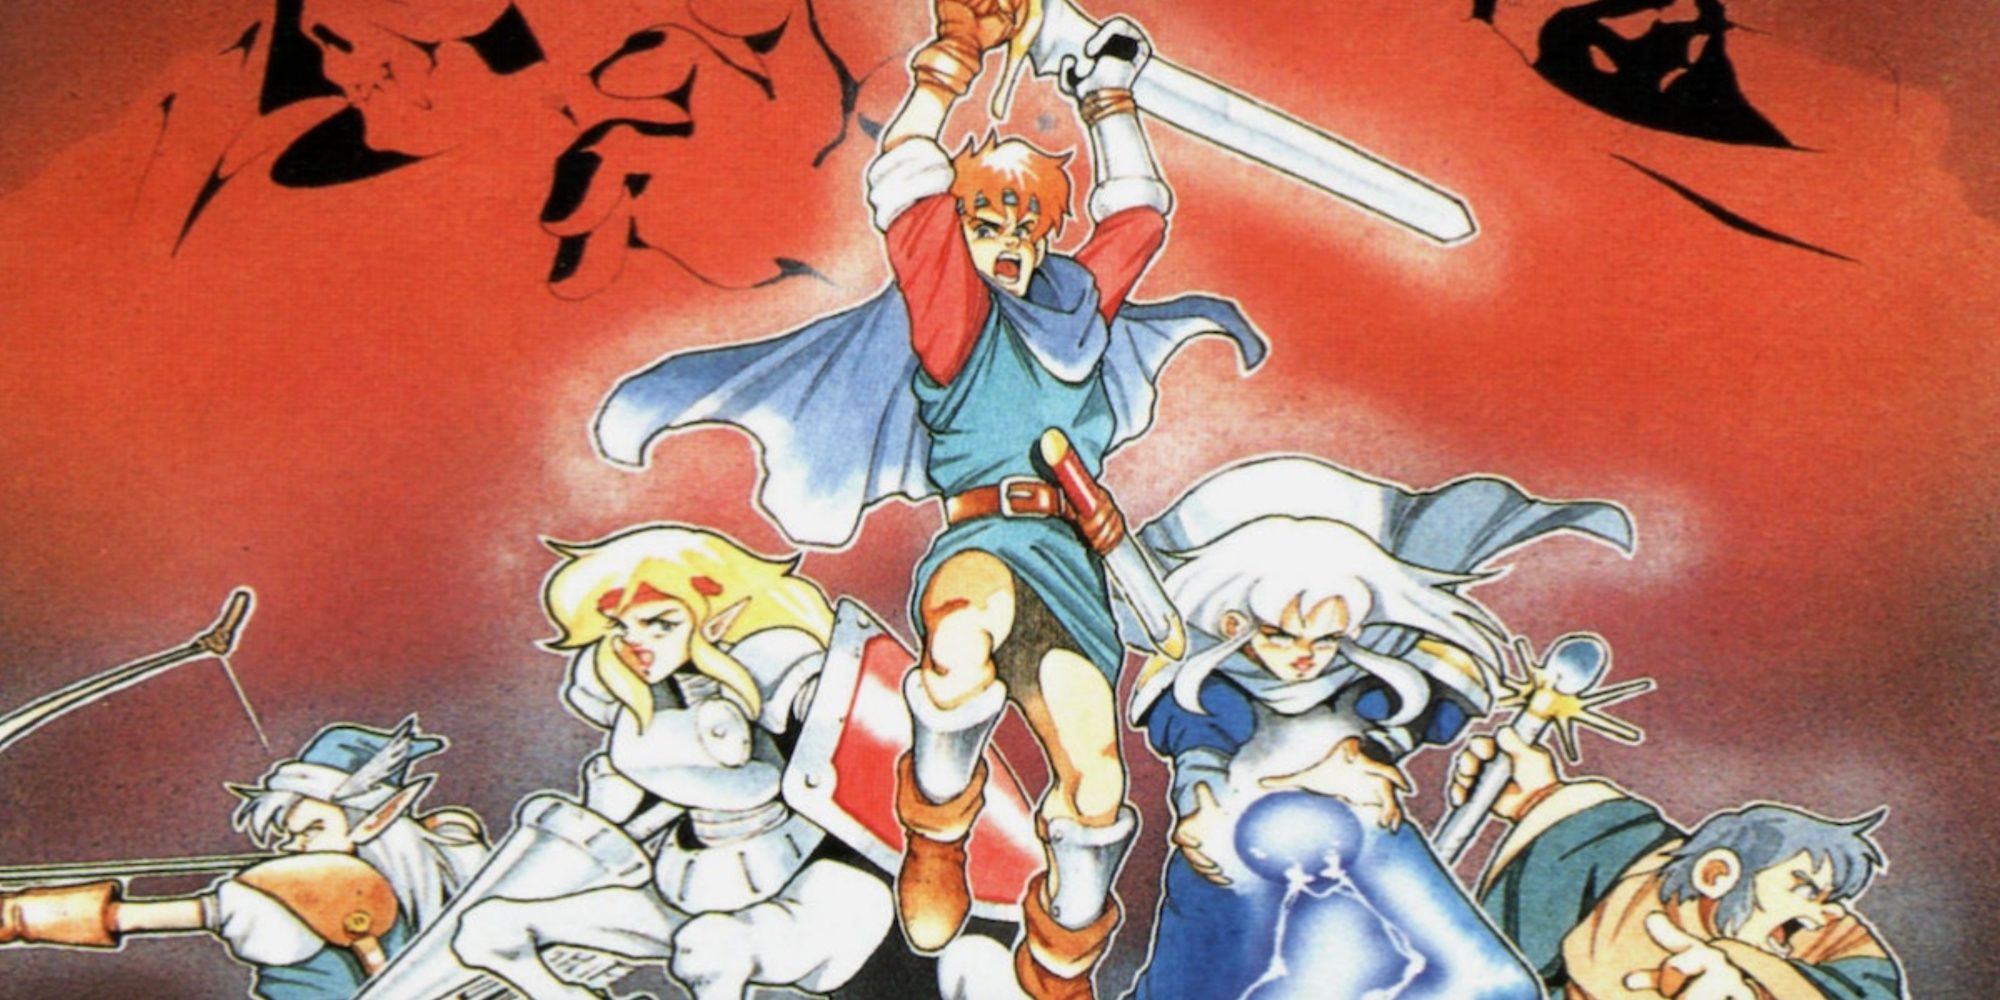 Promo art featuring characters in Shining Force